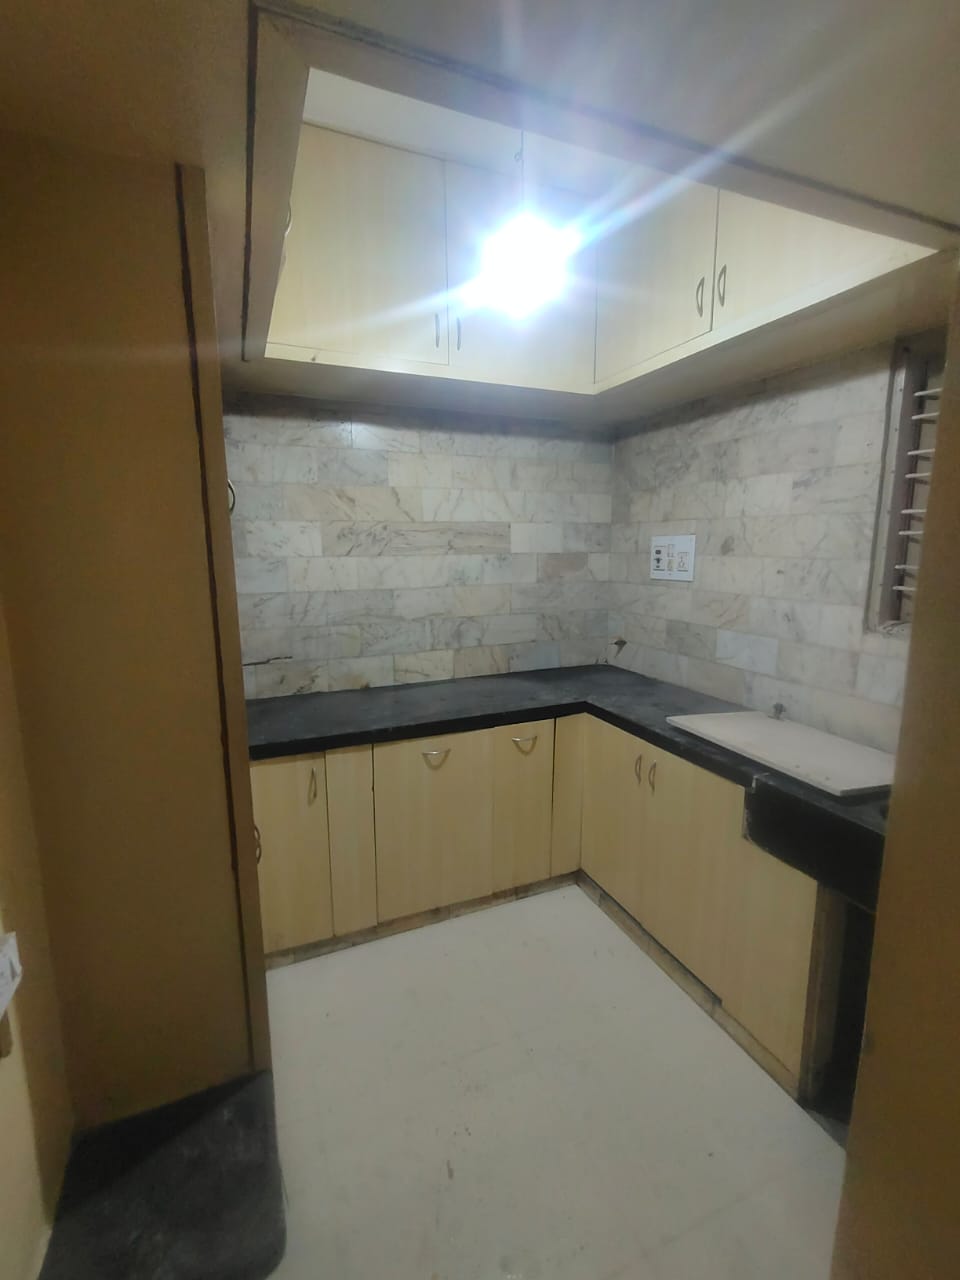 2 BHK Independent House for Lease Only at JAML2 - 4974-21lakh in Maruthi Nagar